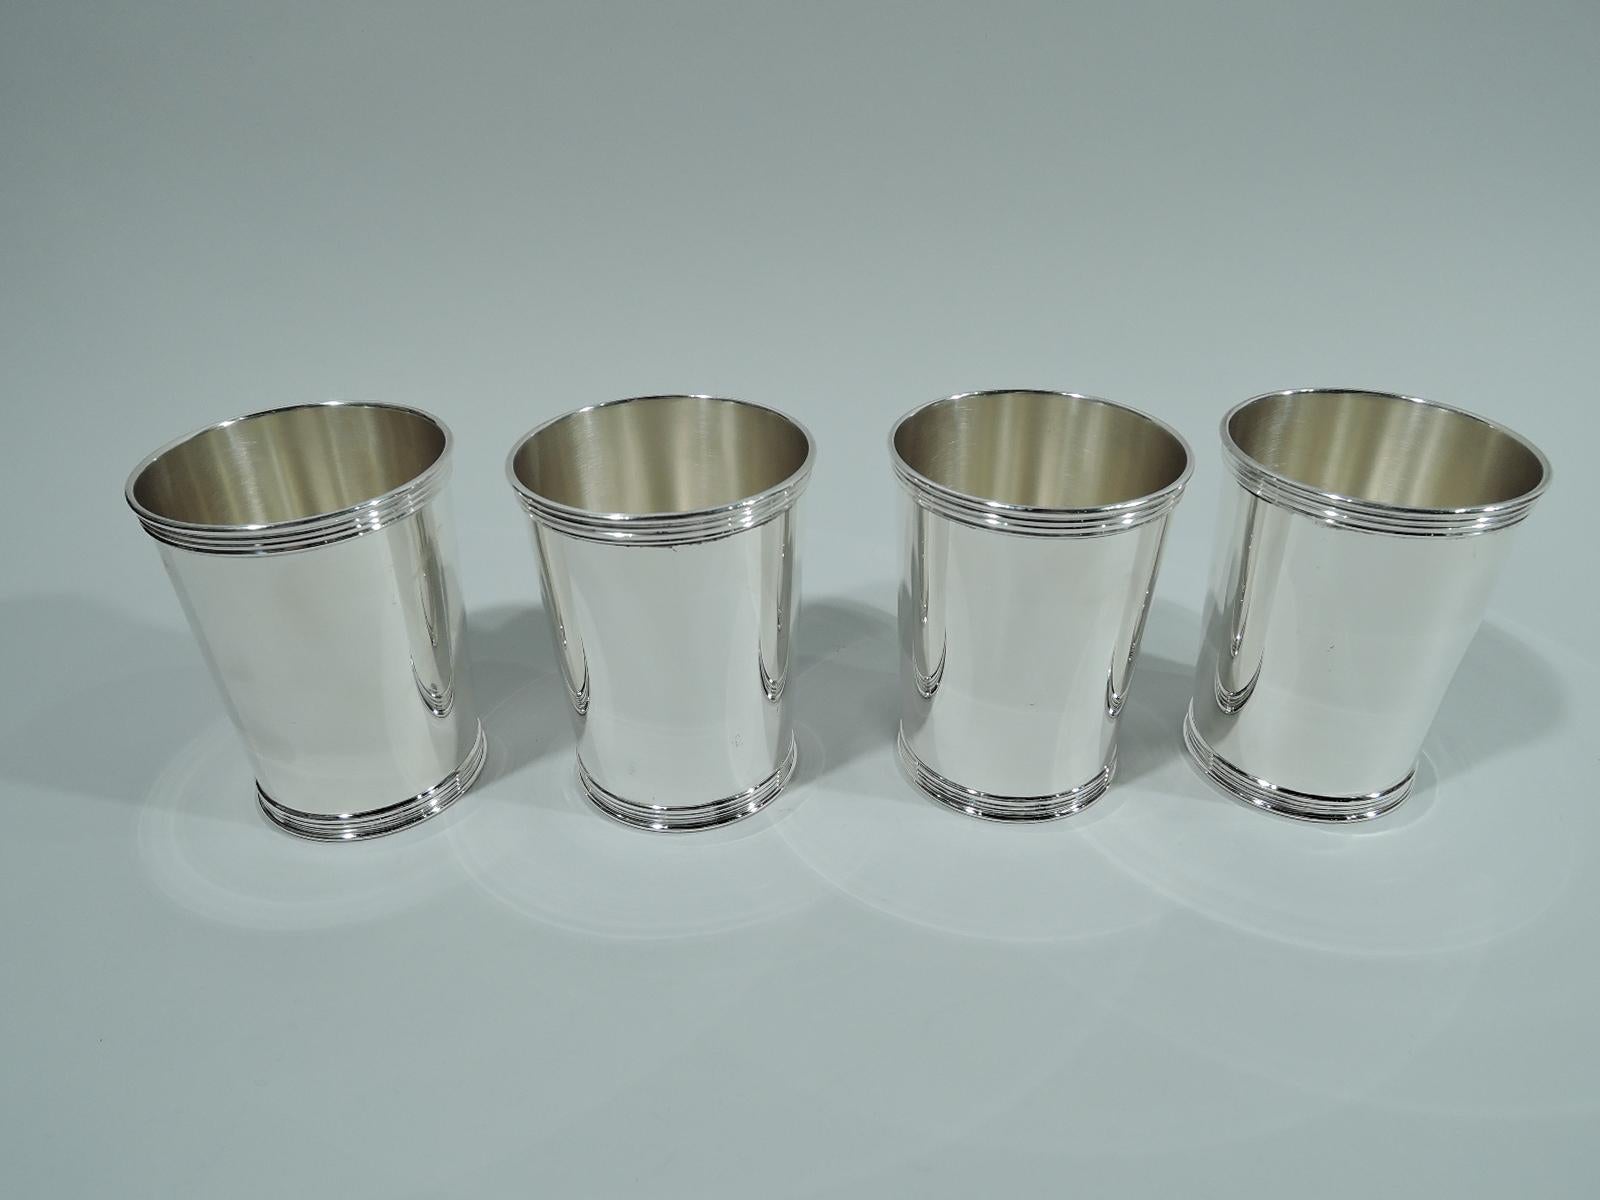 Set of 4 sterling silver mint julep cups. Each: Straight and tapering sides, and reeded rim and foot. A great way to celebrate Derby day with a few close friends. Marked “Sterling / Trees”. Benjamin Trees was active in Lexington, Kentucky from the